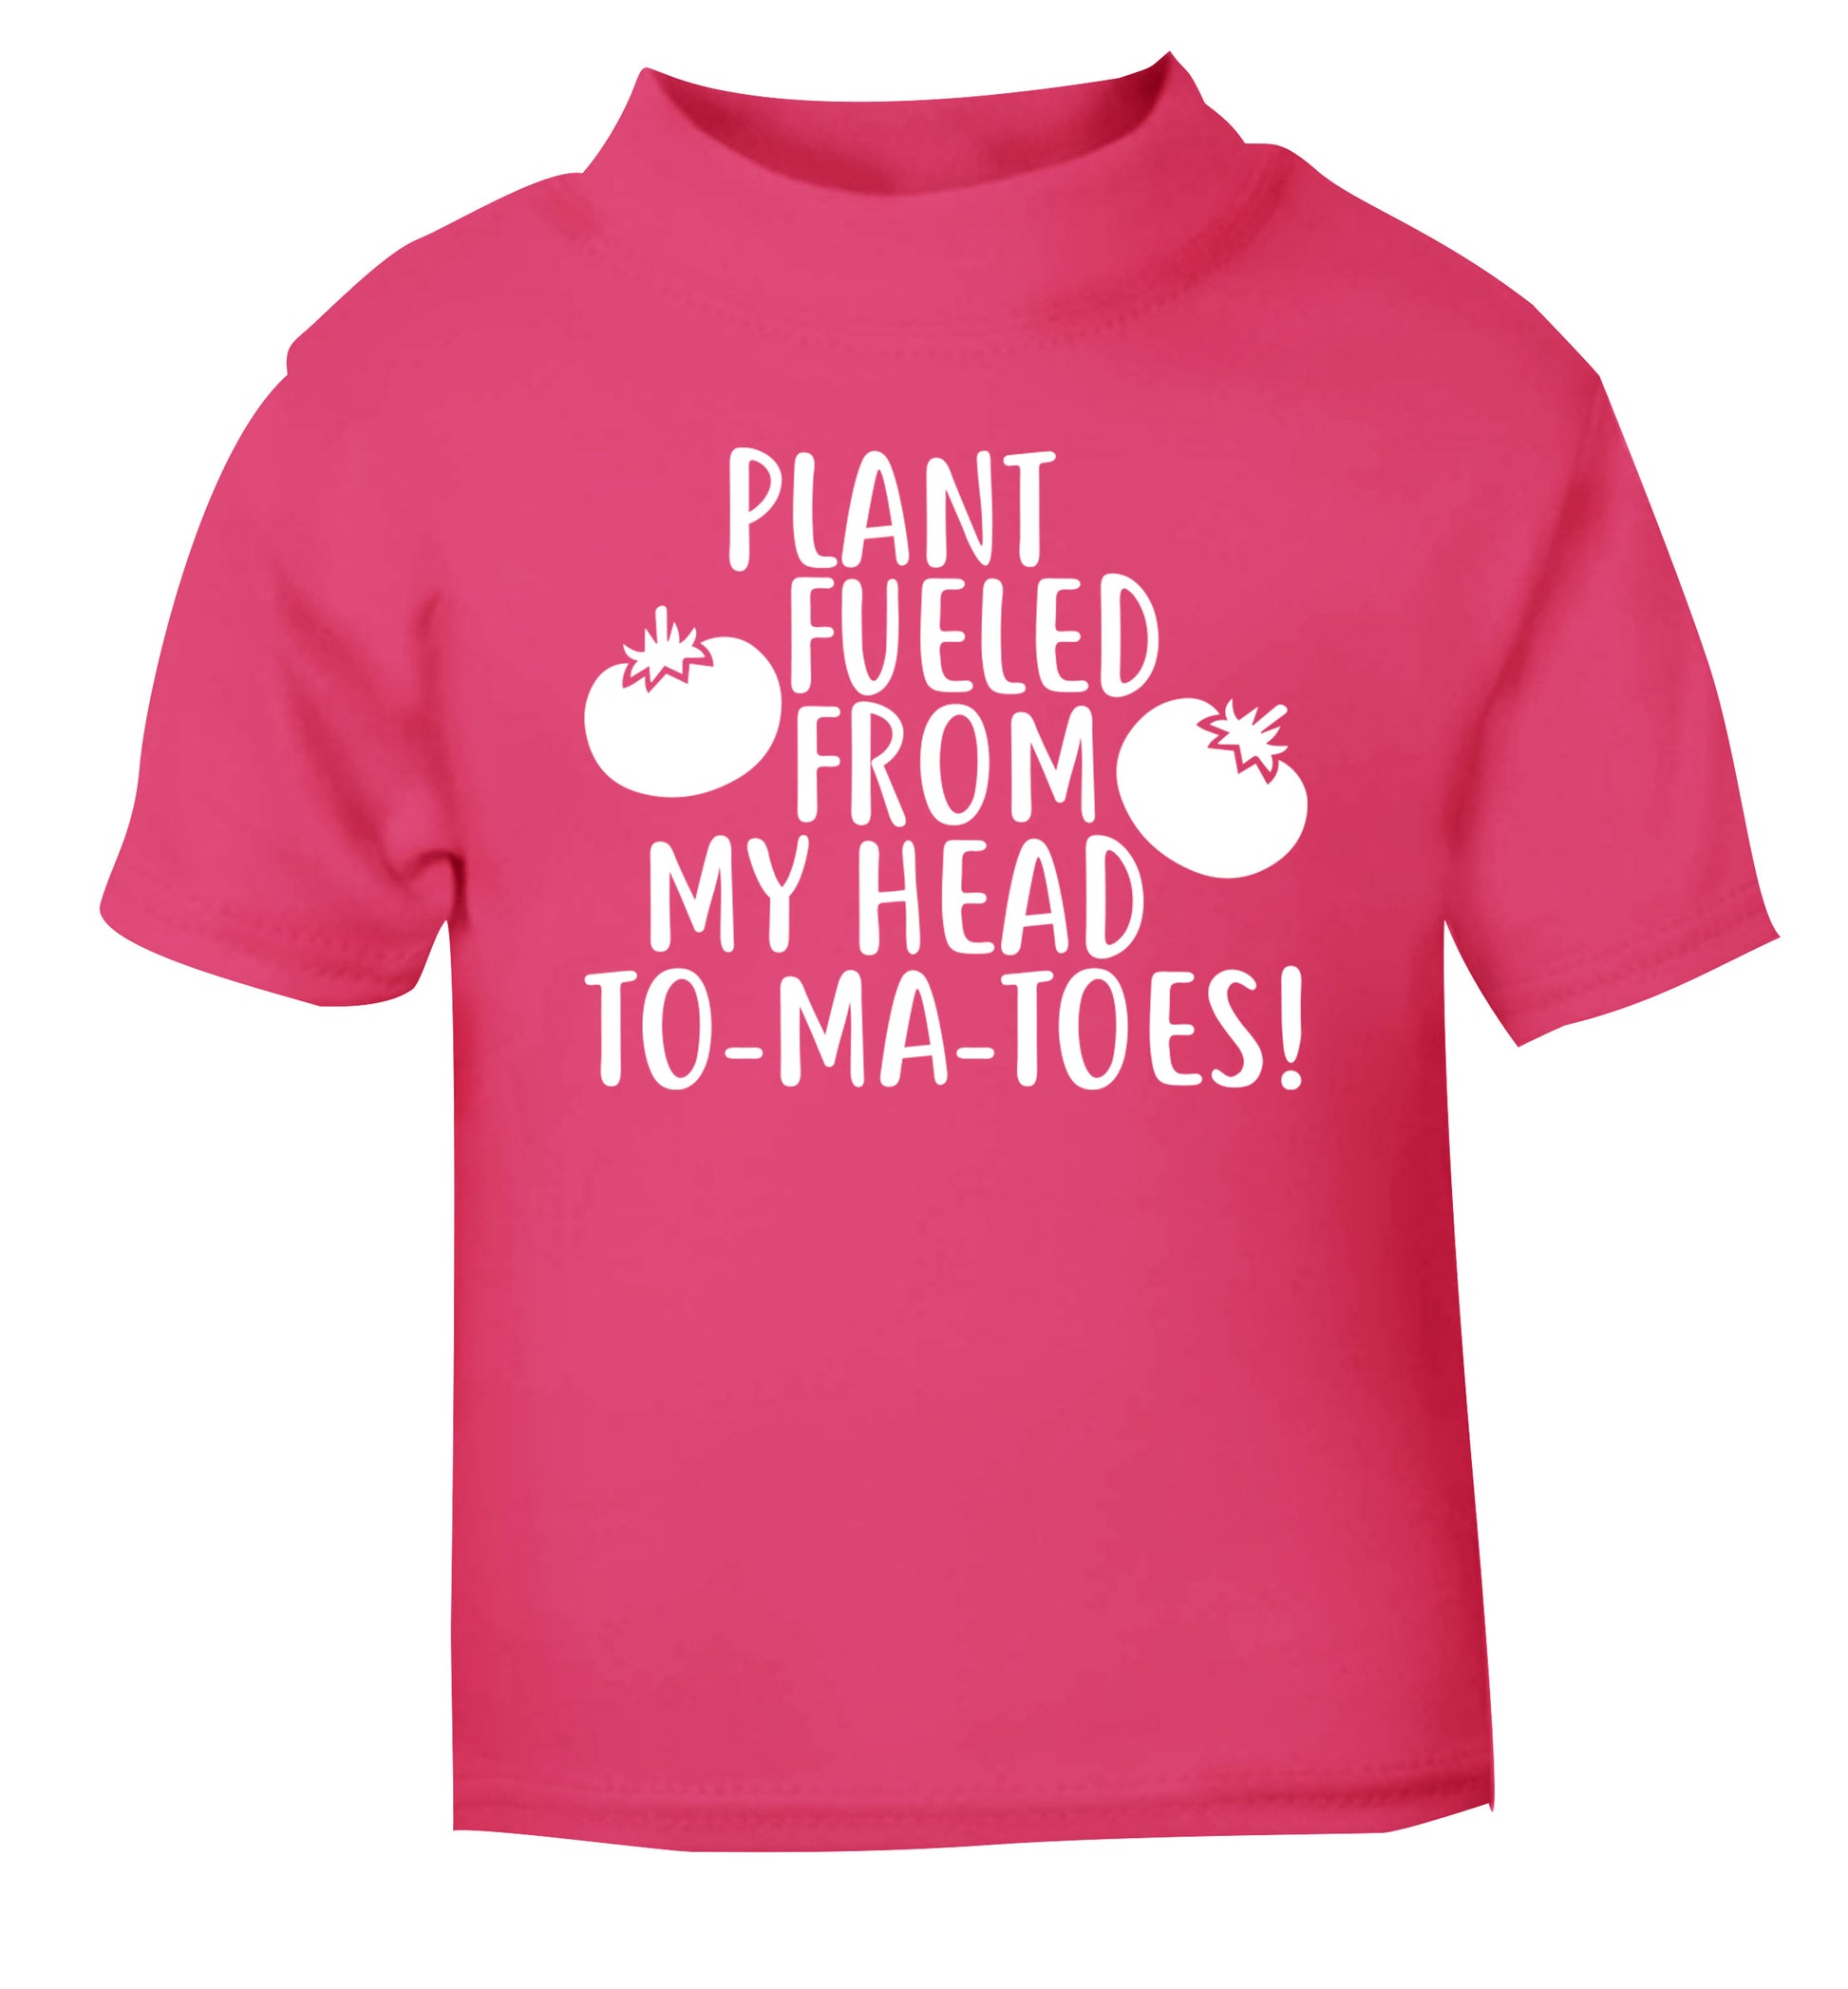 Plant fueled from my head to-ma-toes pink Baby Toddler Tshirt 2 Years